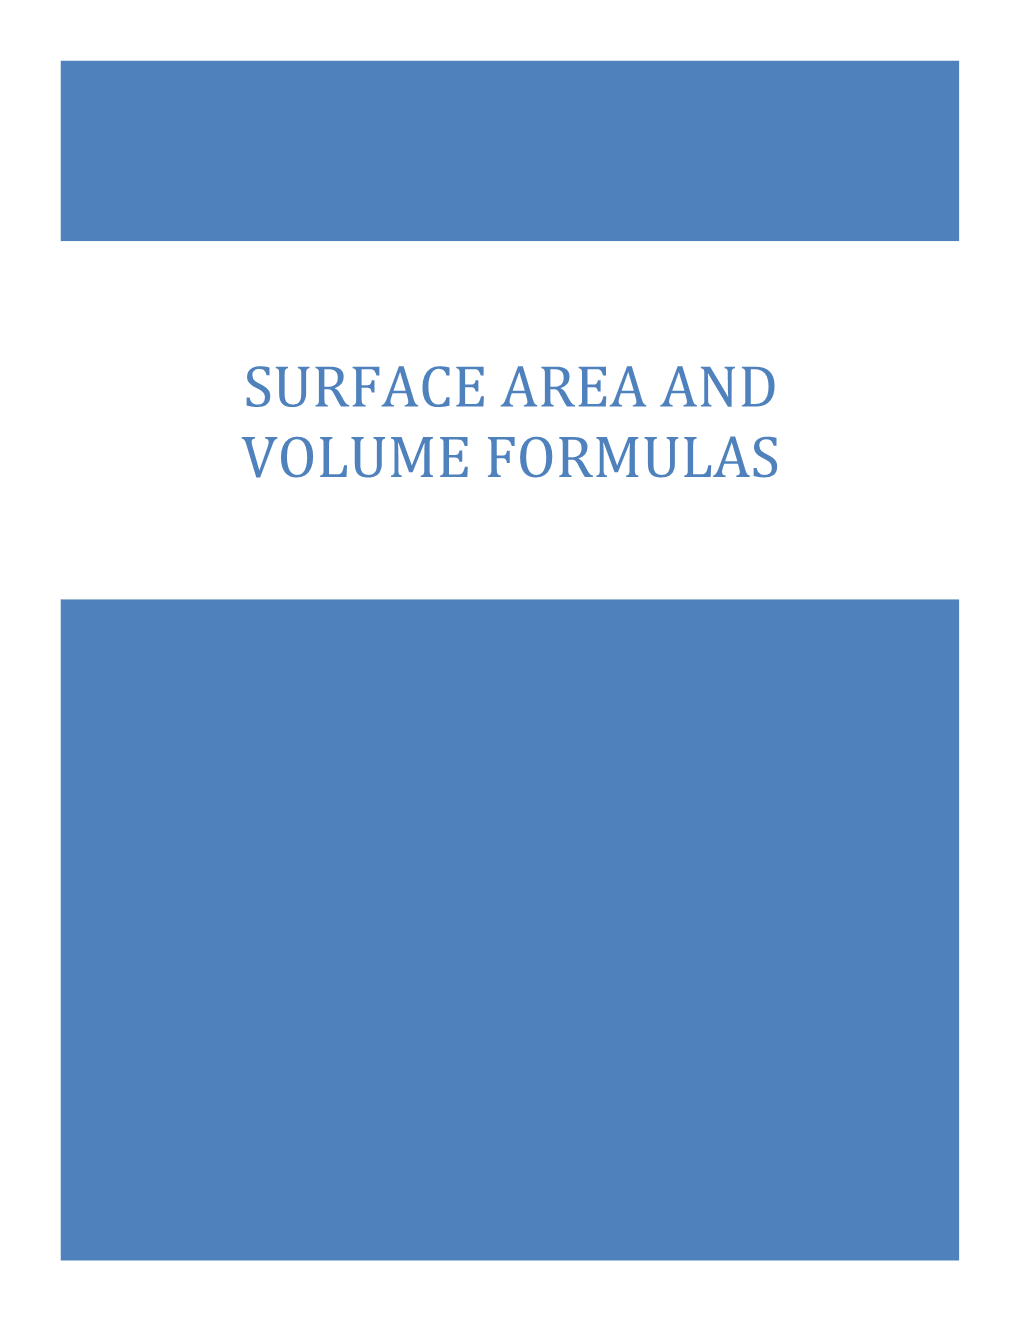 Surface Area and Volume Formula's